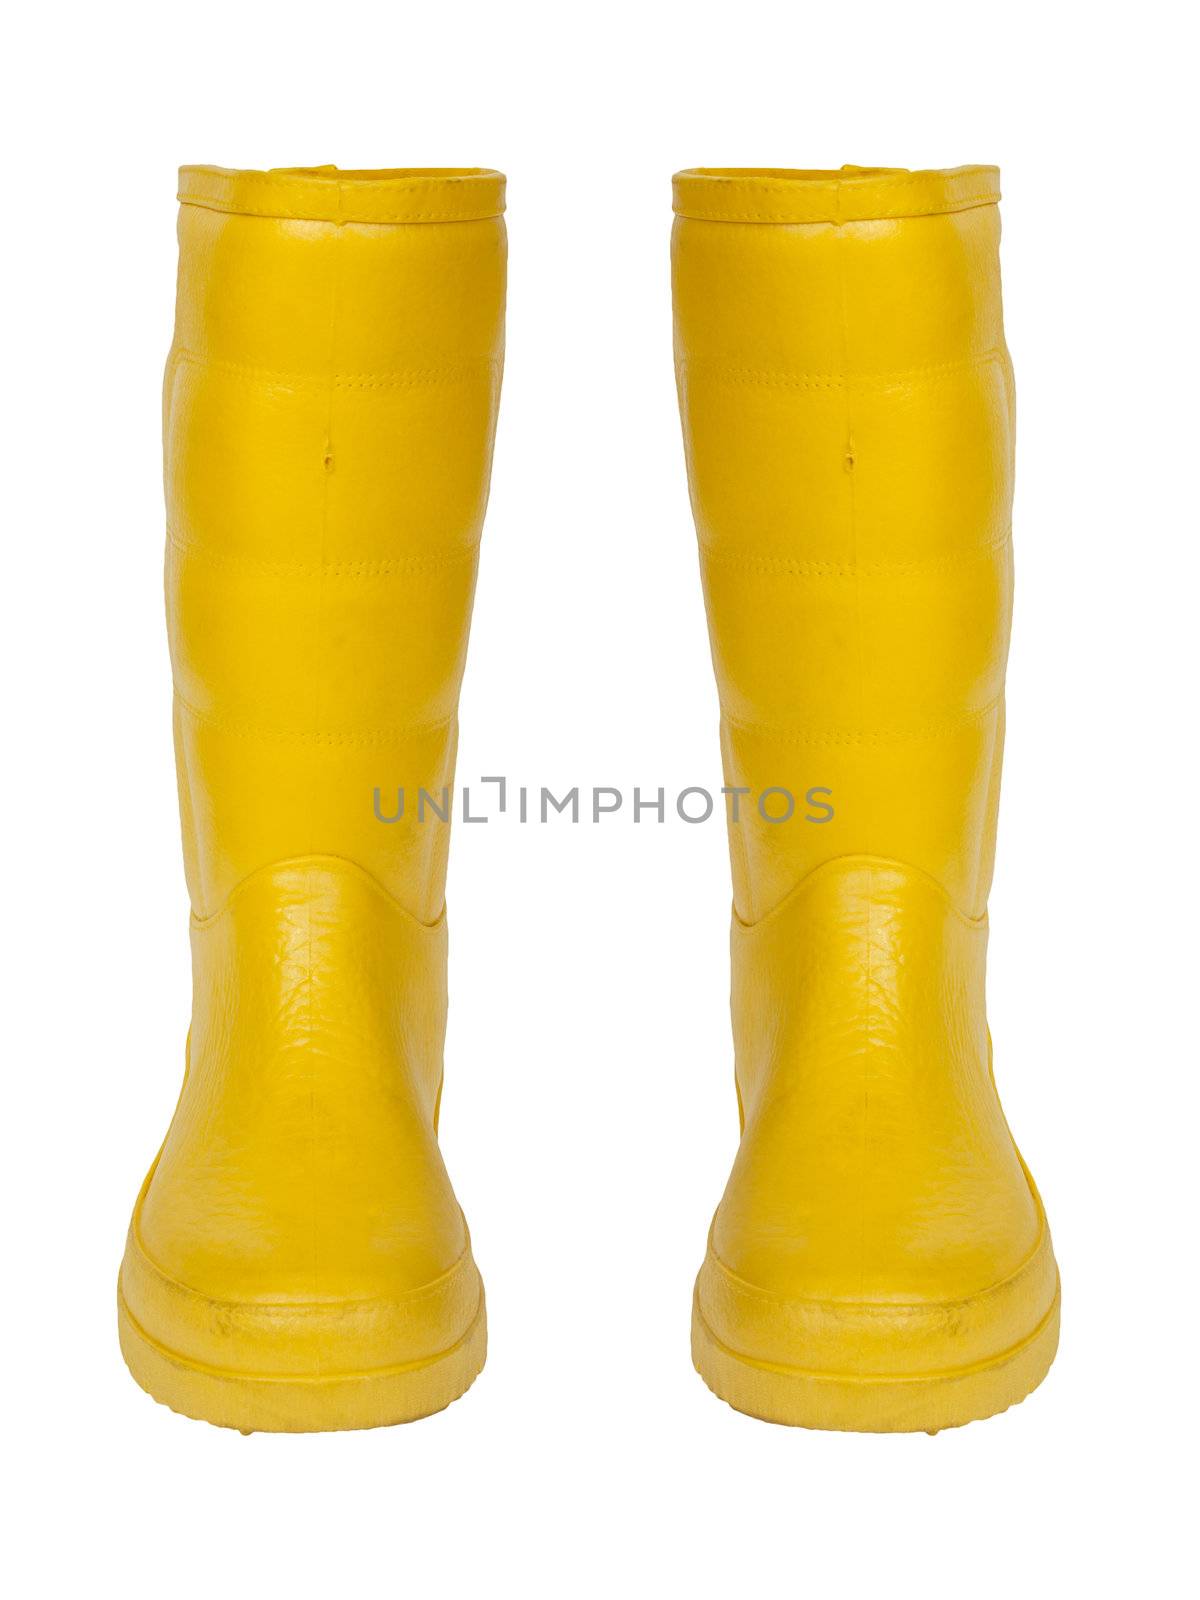 rubber boot yellow color by FrameAngel